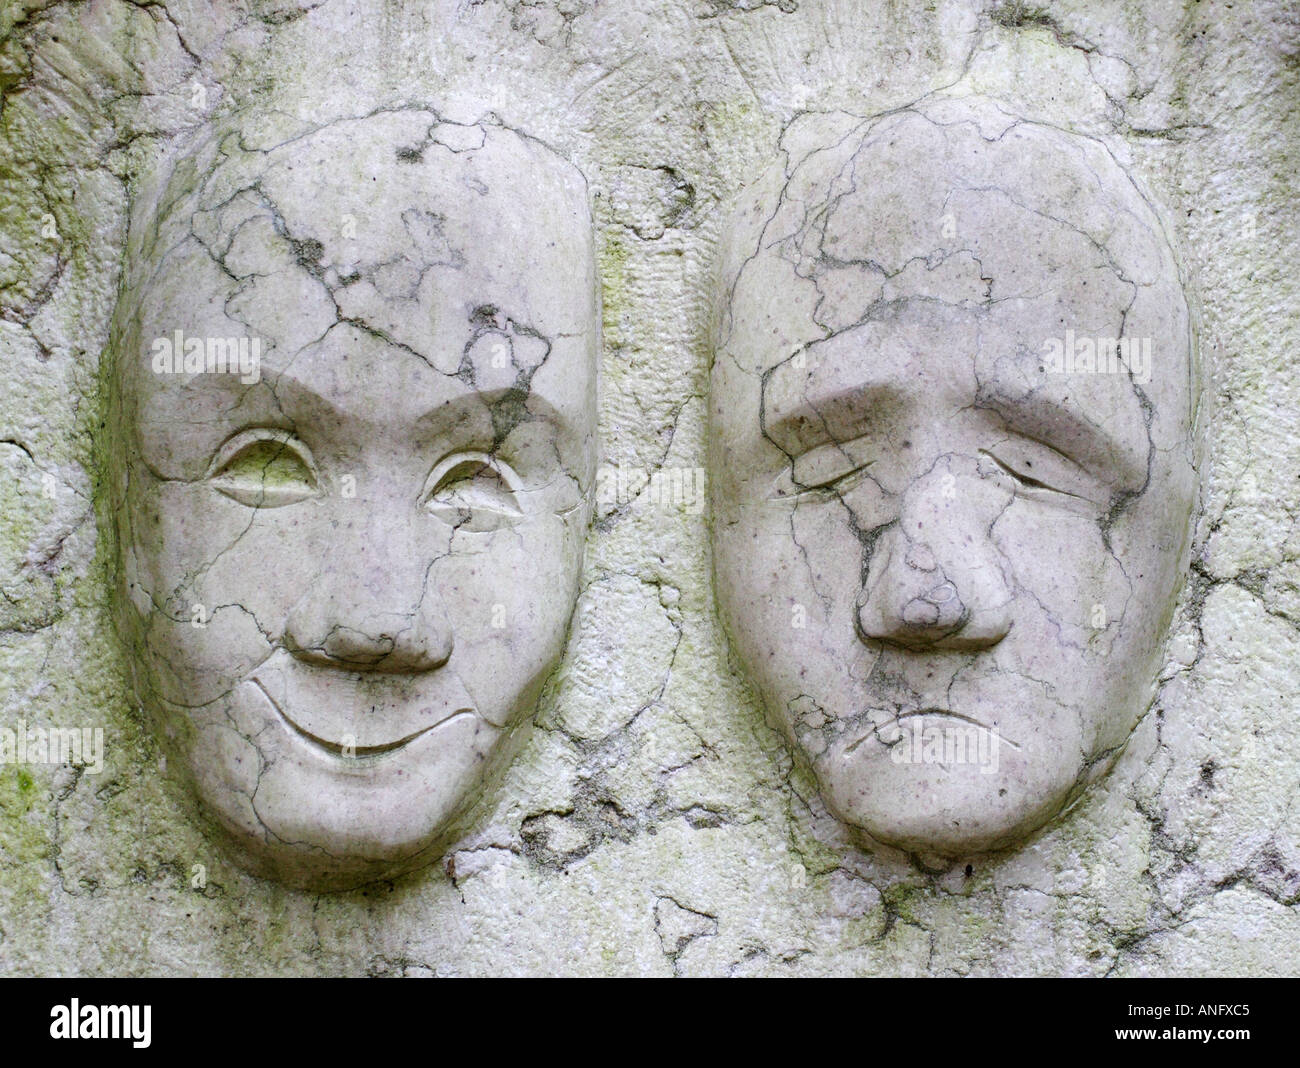 Laughing and sad mask sculpted of stone inspired by classical comedy and tragedy, performing arts, theatre, theater Stock Photo